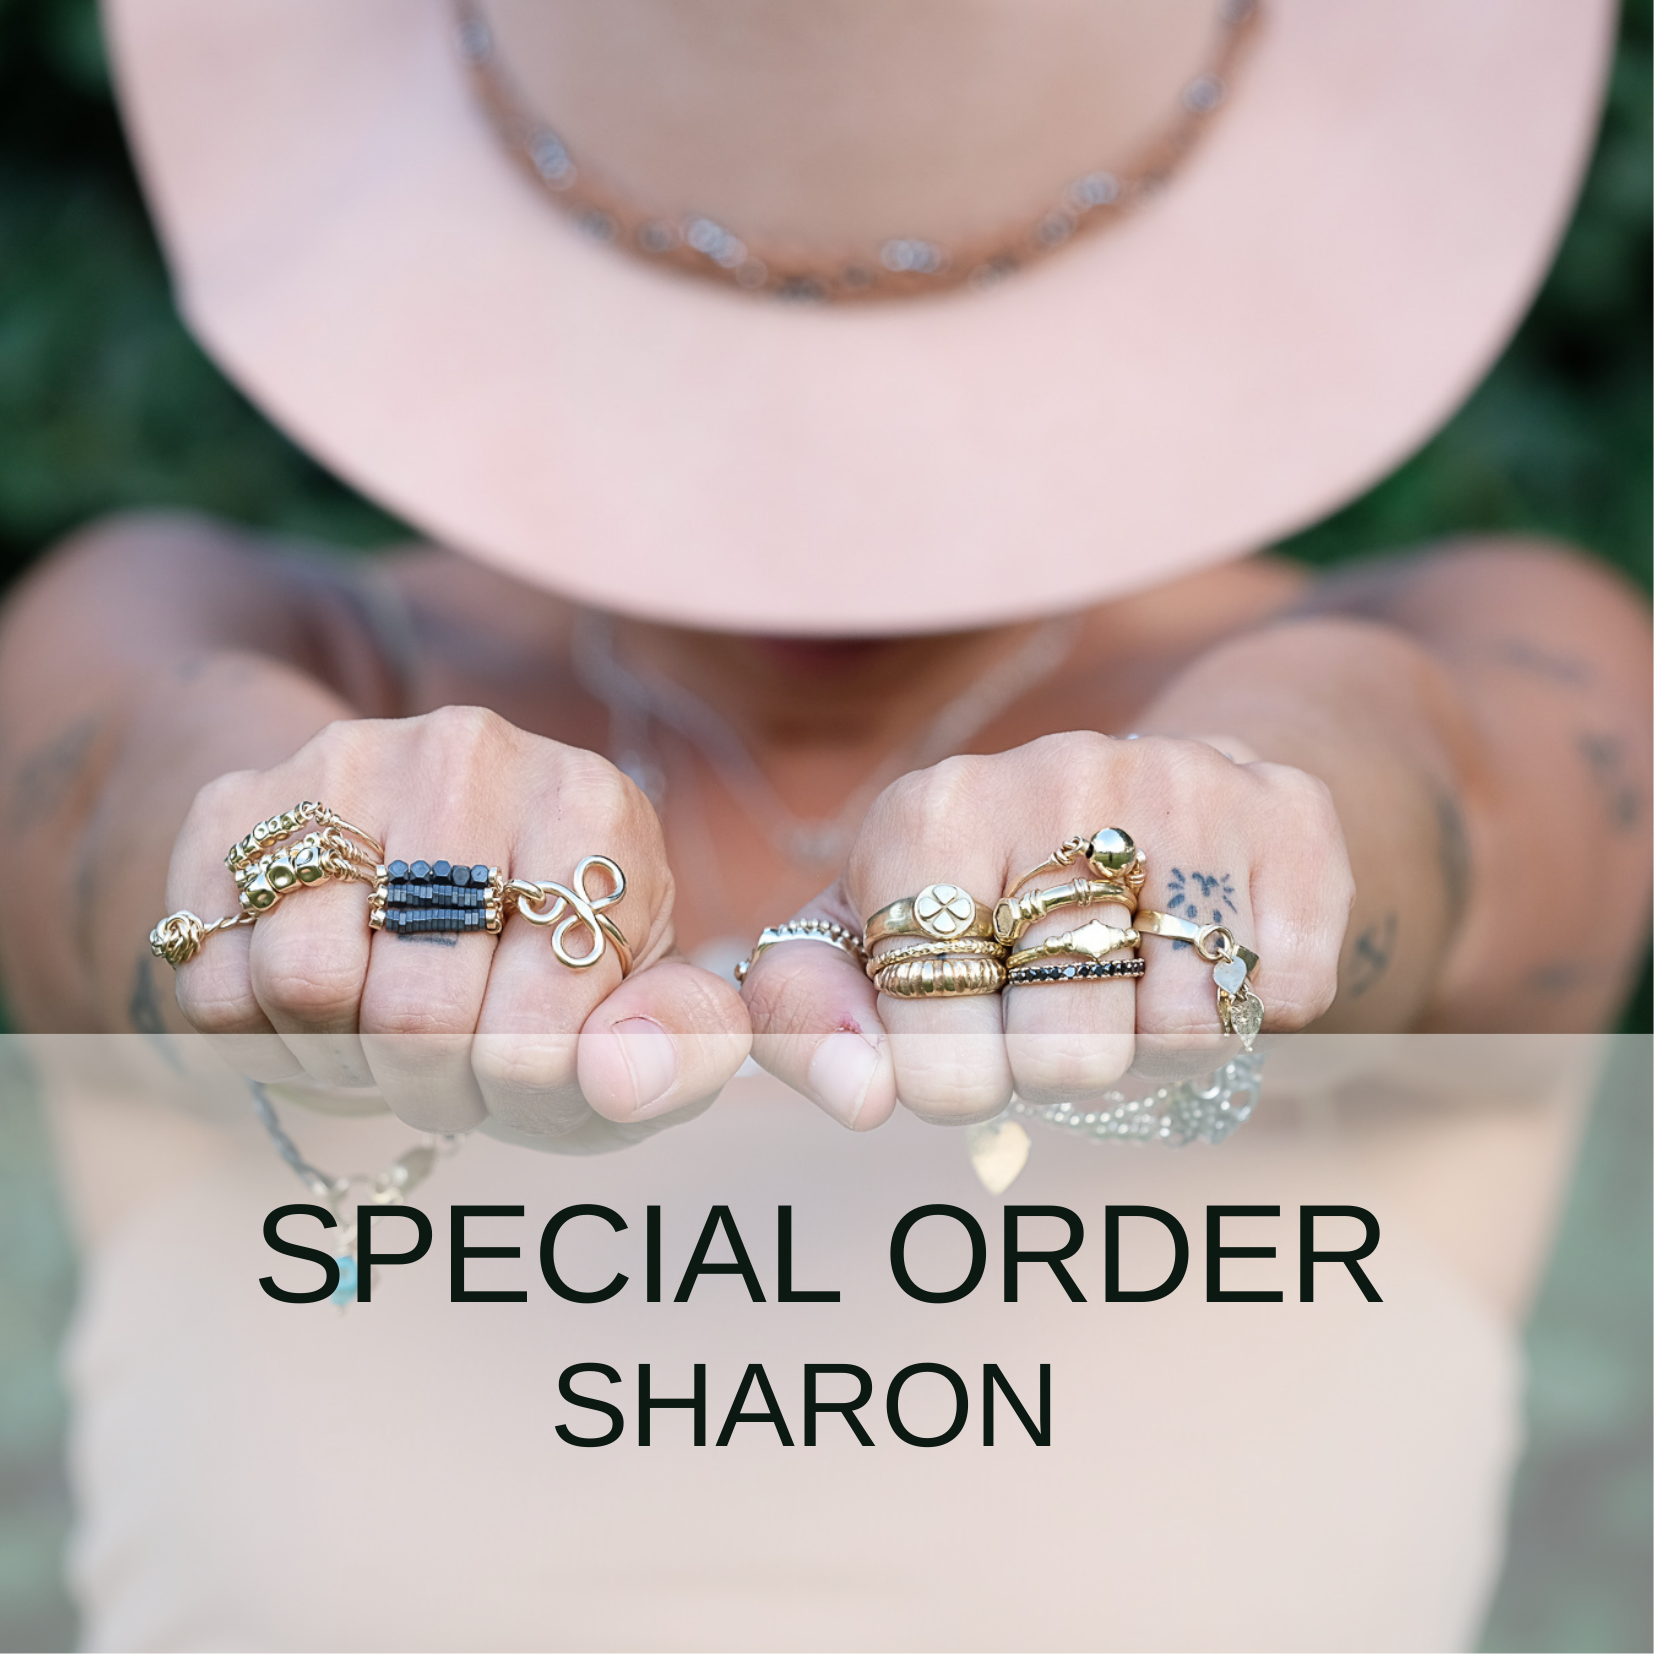 SPECIAL ORDER SHARON